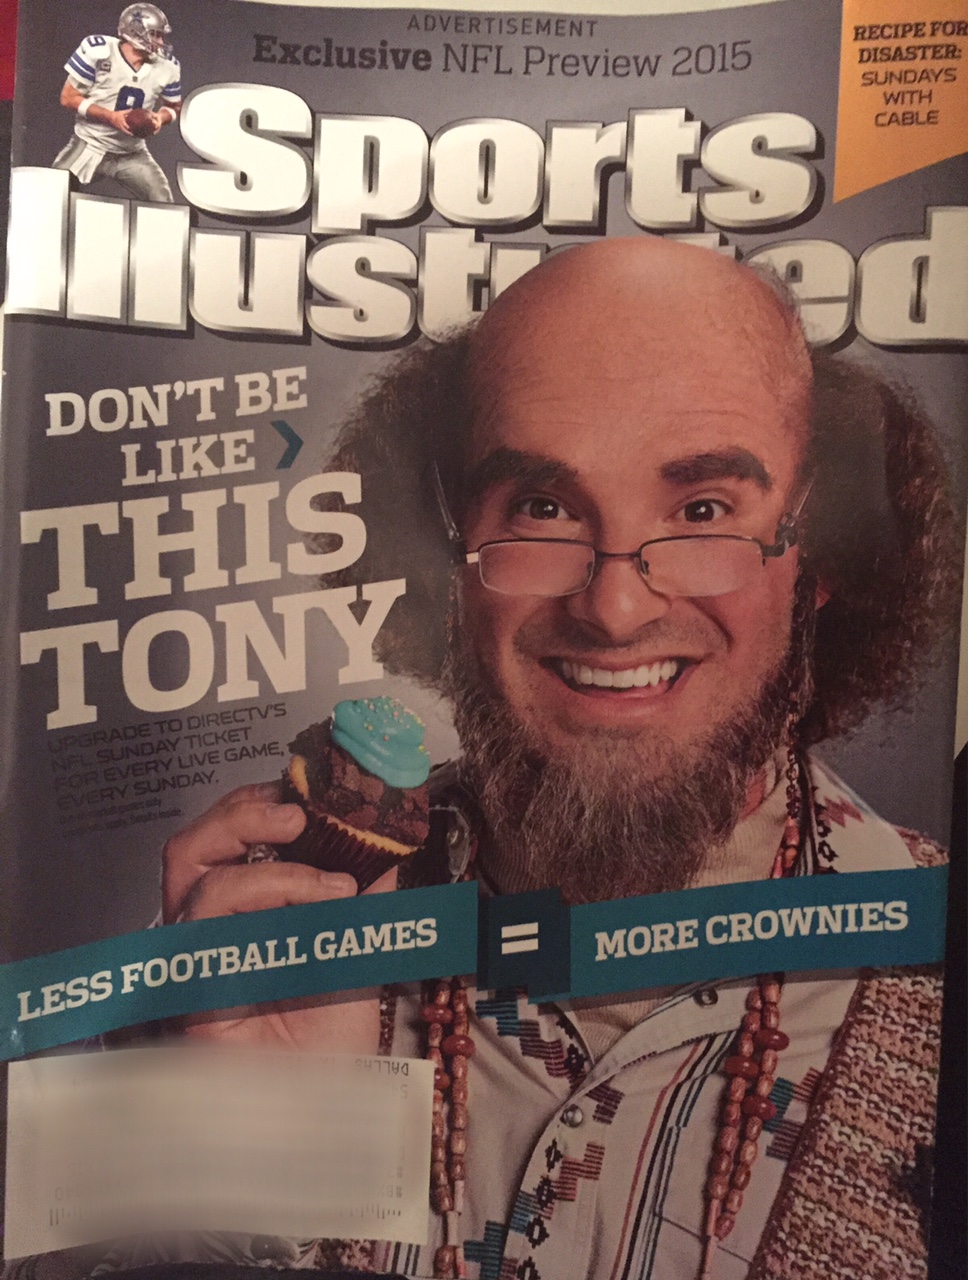 Ad wrap puts 'Arts and Craftsy' Tony Romo on Sports Illustrated Cover